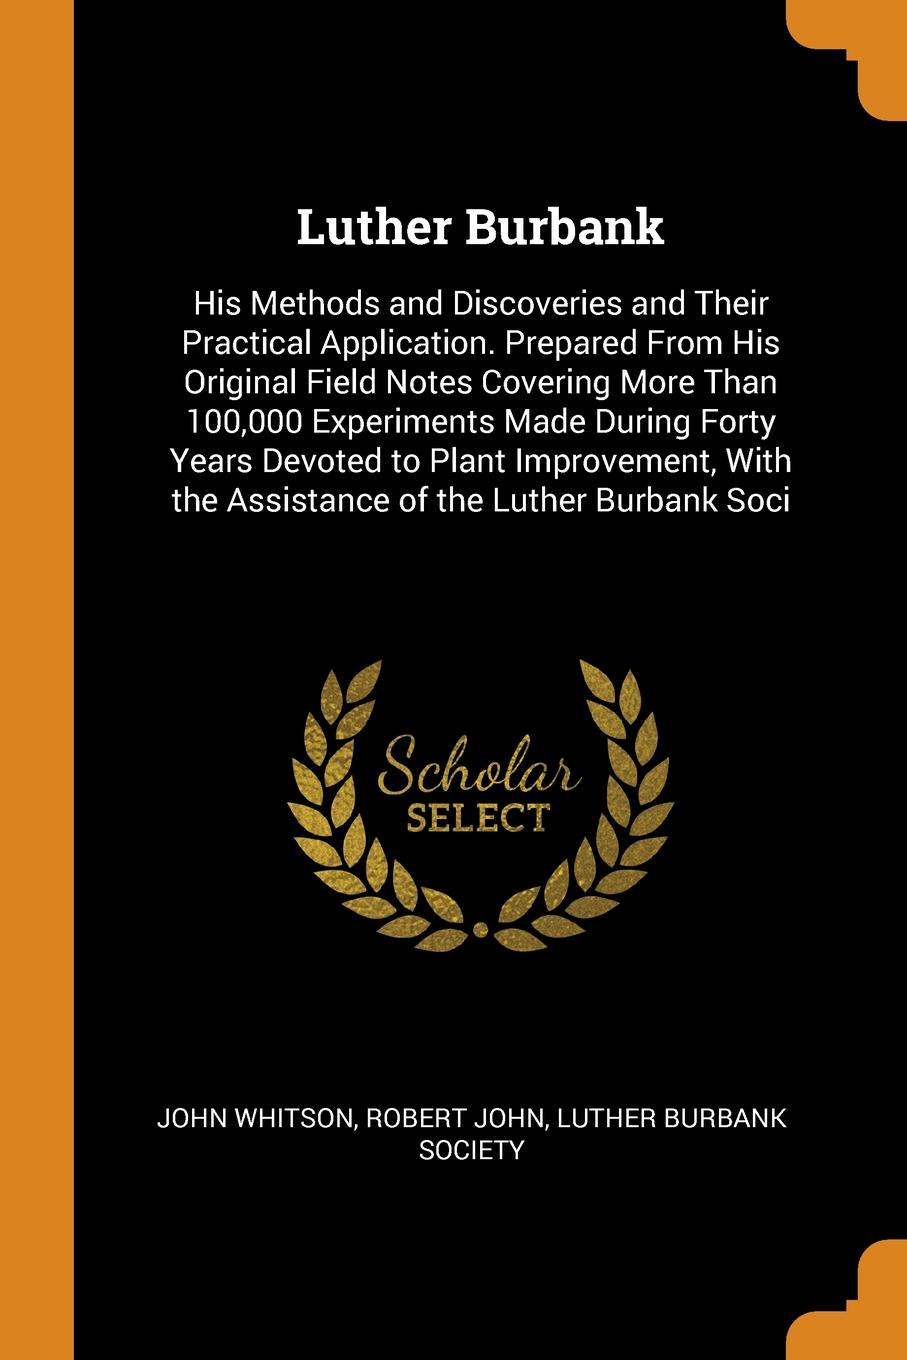 Luther Burbank. His Methods and Discoveries and Their Practical Application. Prepared From His Original Field Notes Covering More Than 100,000 Experiments Made During Forty Years Devoted to Plant Improvement, With the Assistance of the Luther Burb...